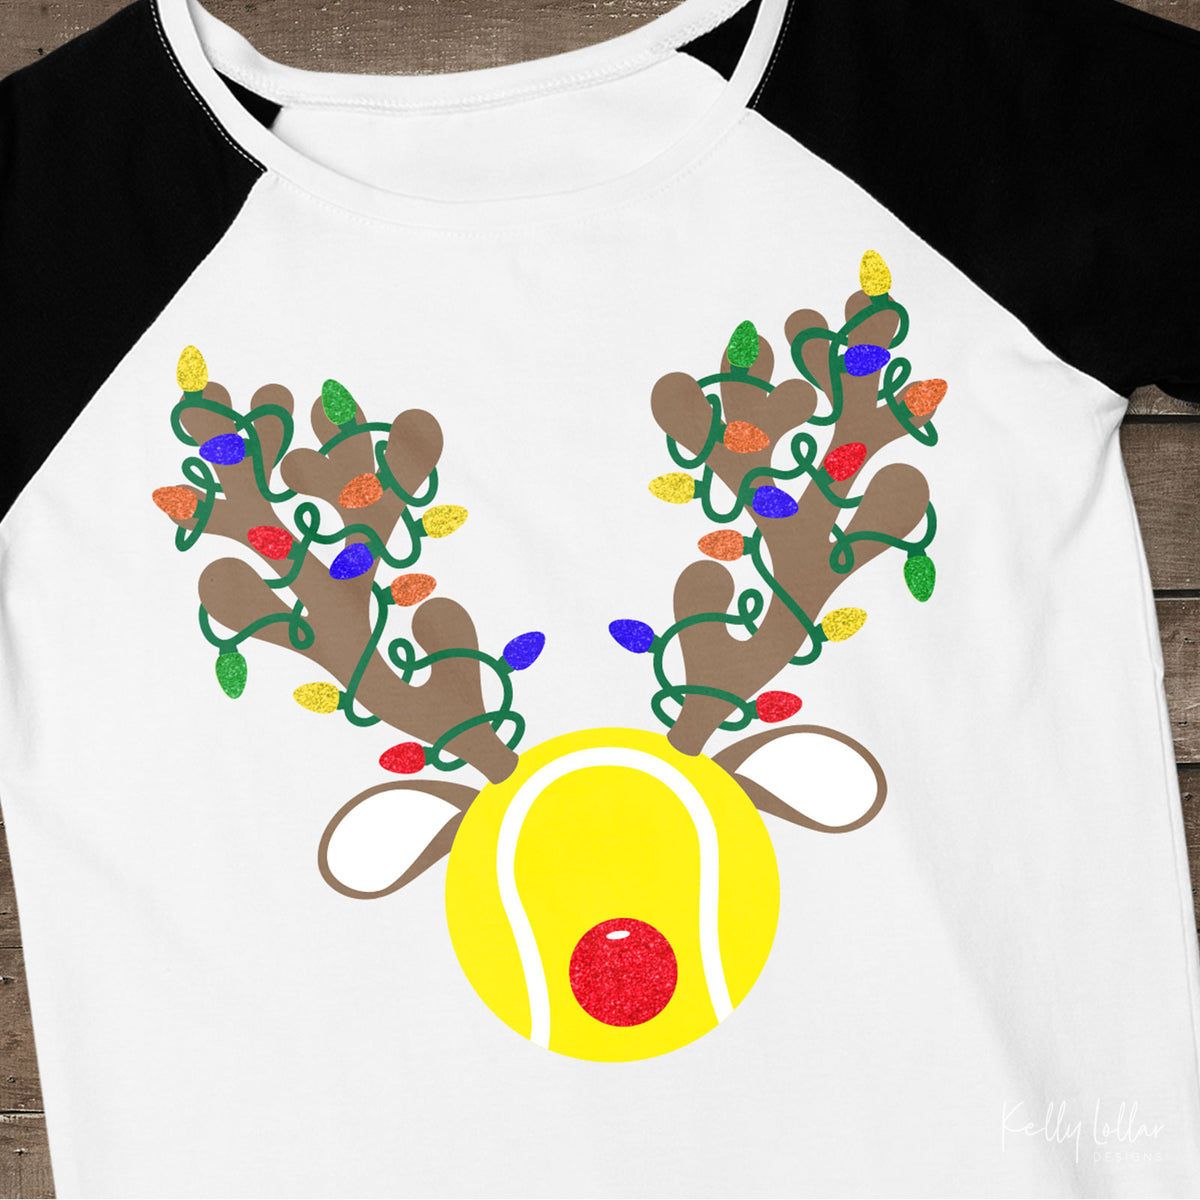 Christmas Light Wrapped Reindeer Antlers and Ears on a Tennis Ball for Holiday Shirts and Decor | SVG DXF PNG Cut Files